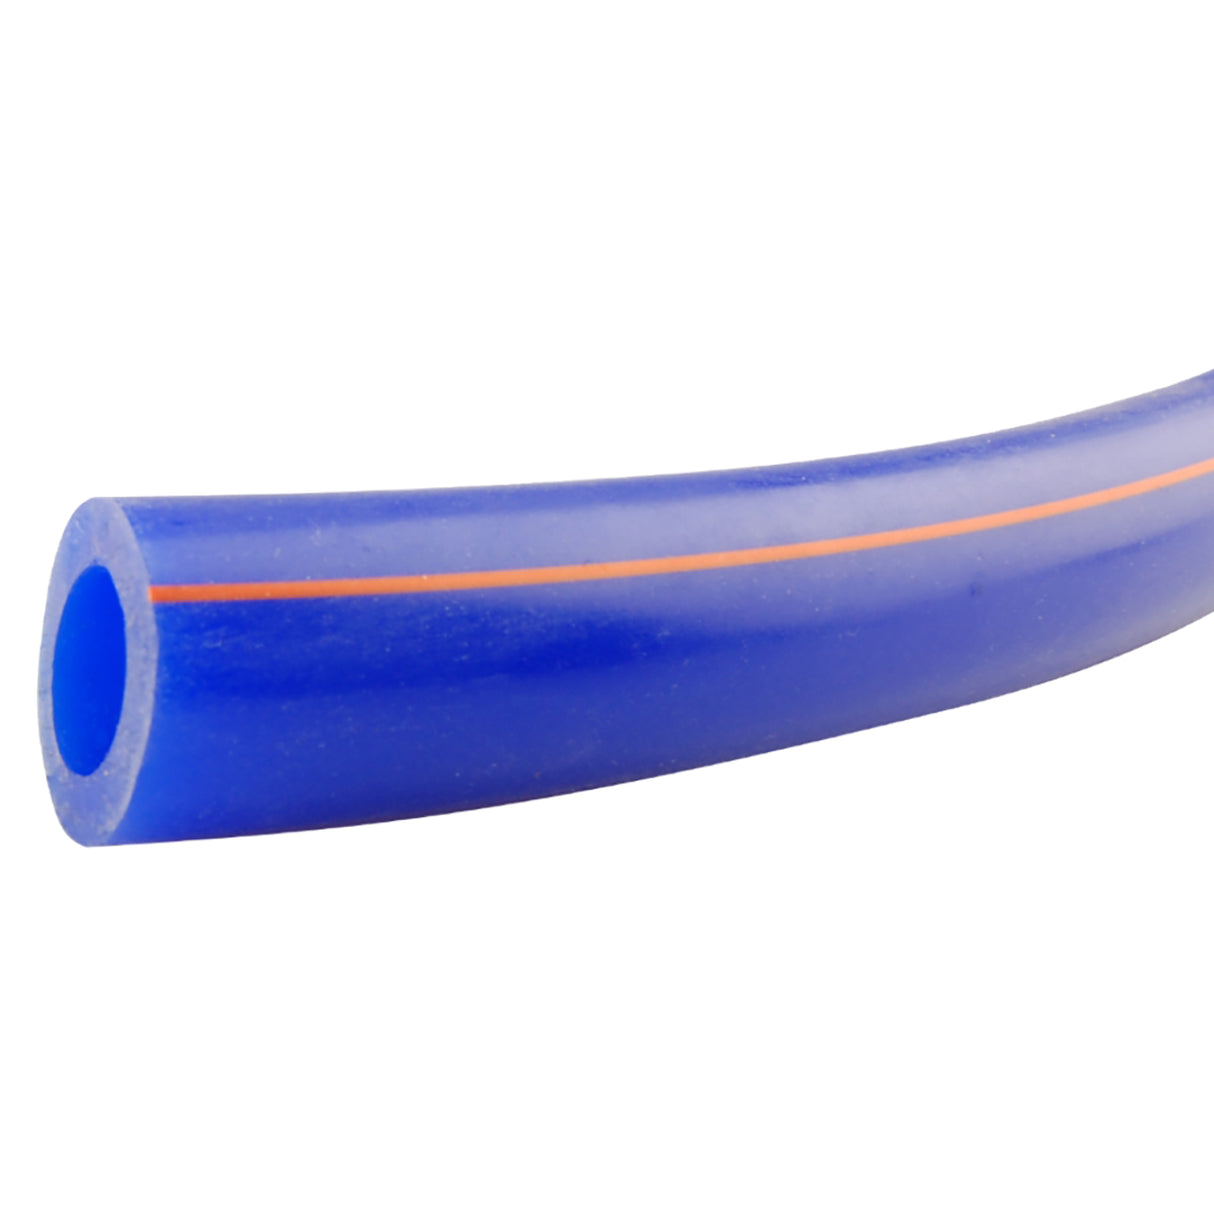 Melkslang silicone 14x25mm blauw